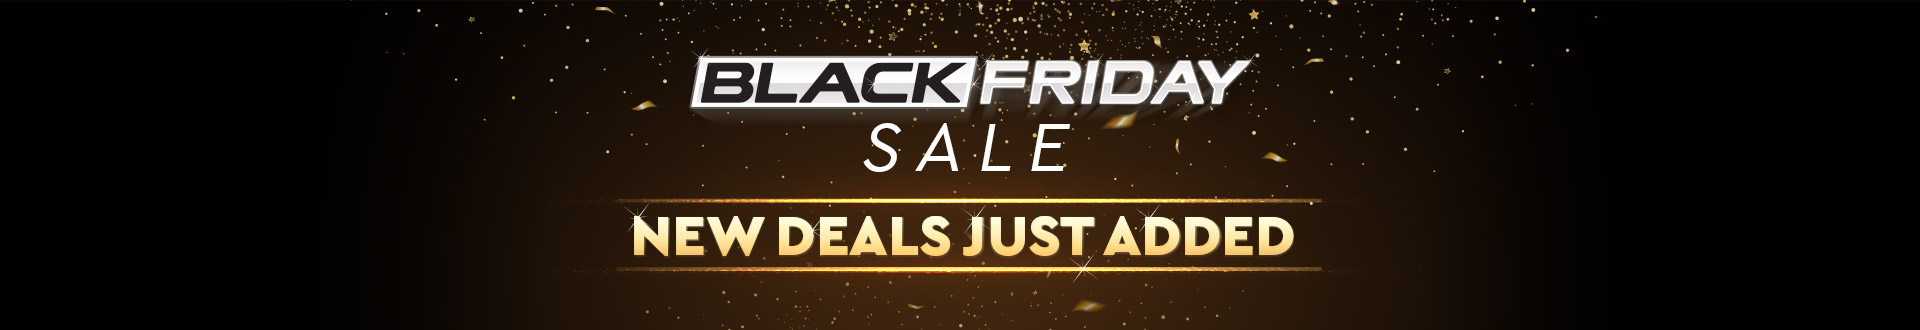 Black Friday Sale New Deals Just Added